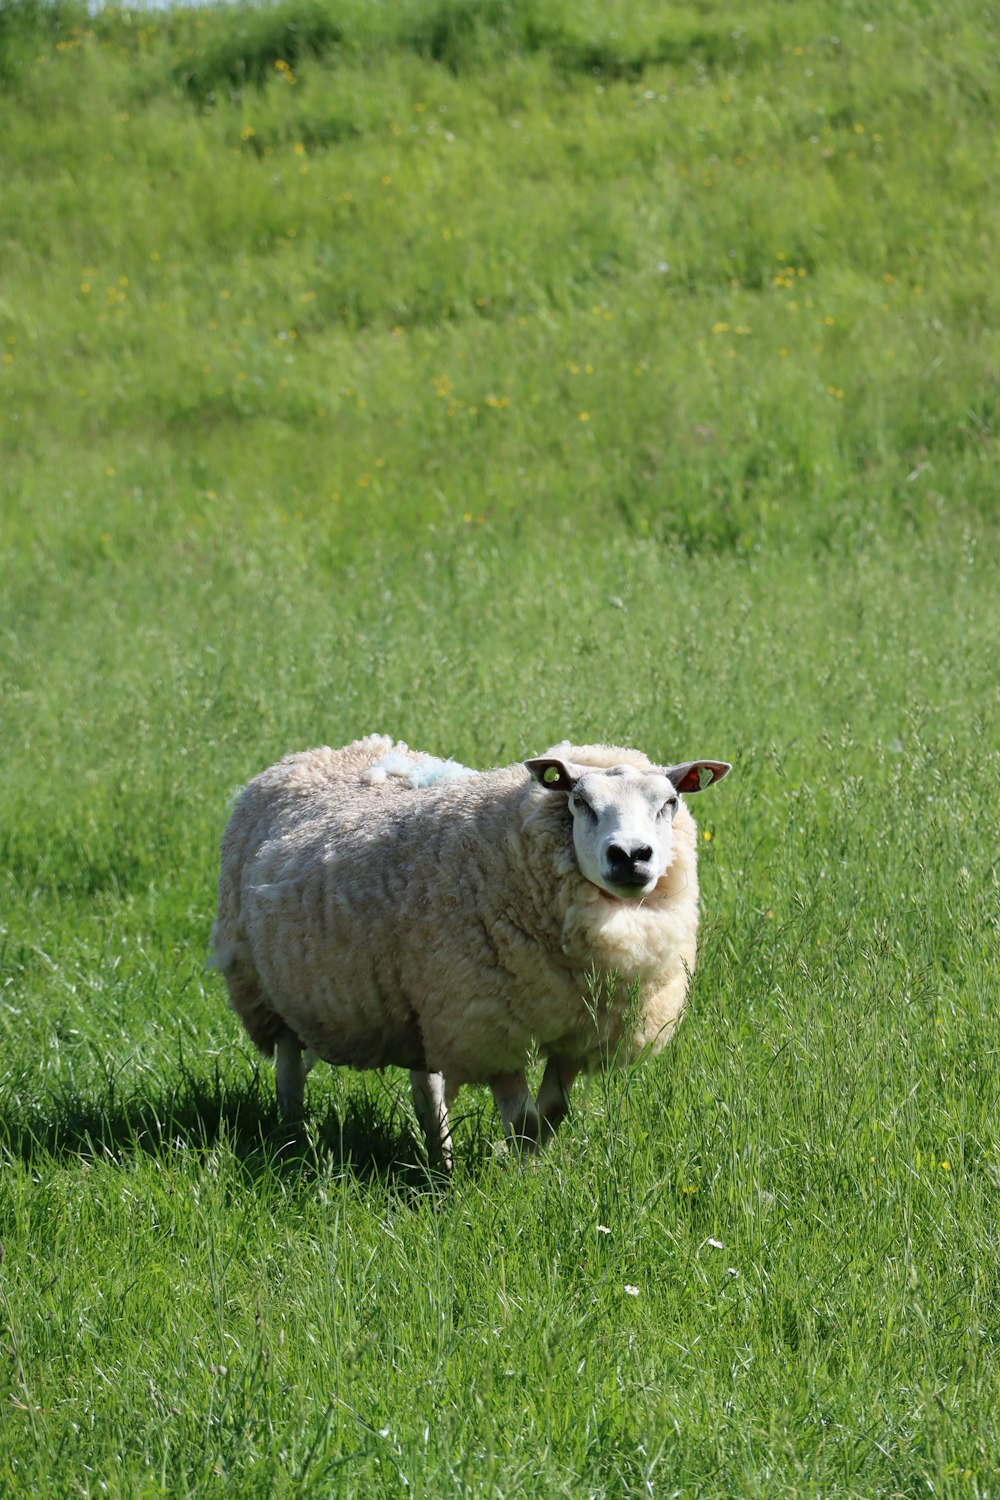 a sheep is standing in a grassy field